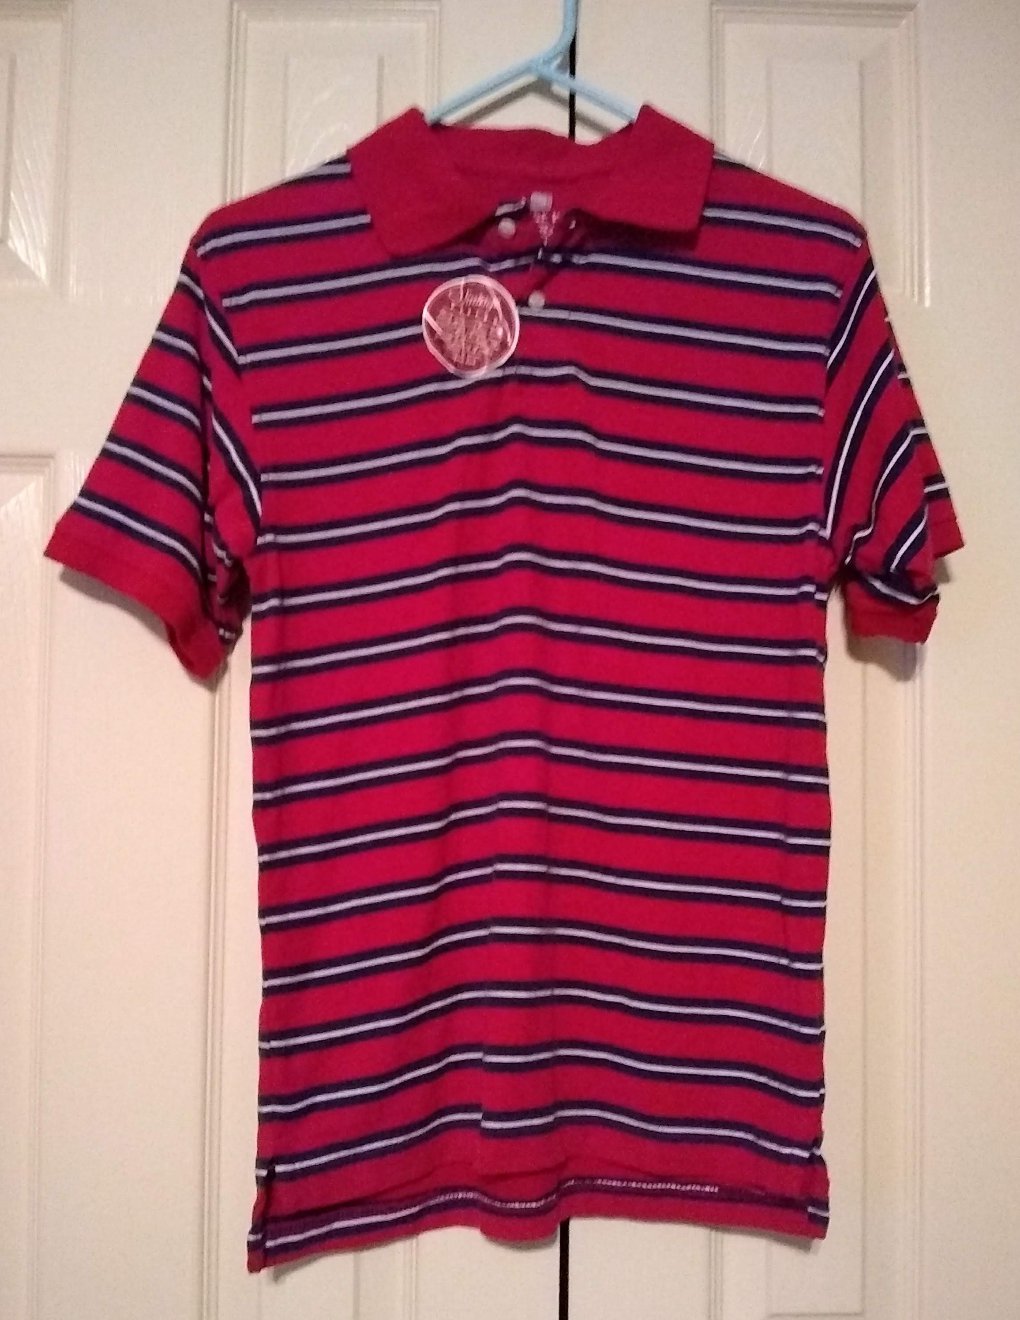 NEW Faded Glory Boys Vintage Wash Striped Polo Golf Style Shirt XL or ...